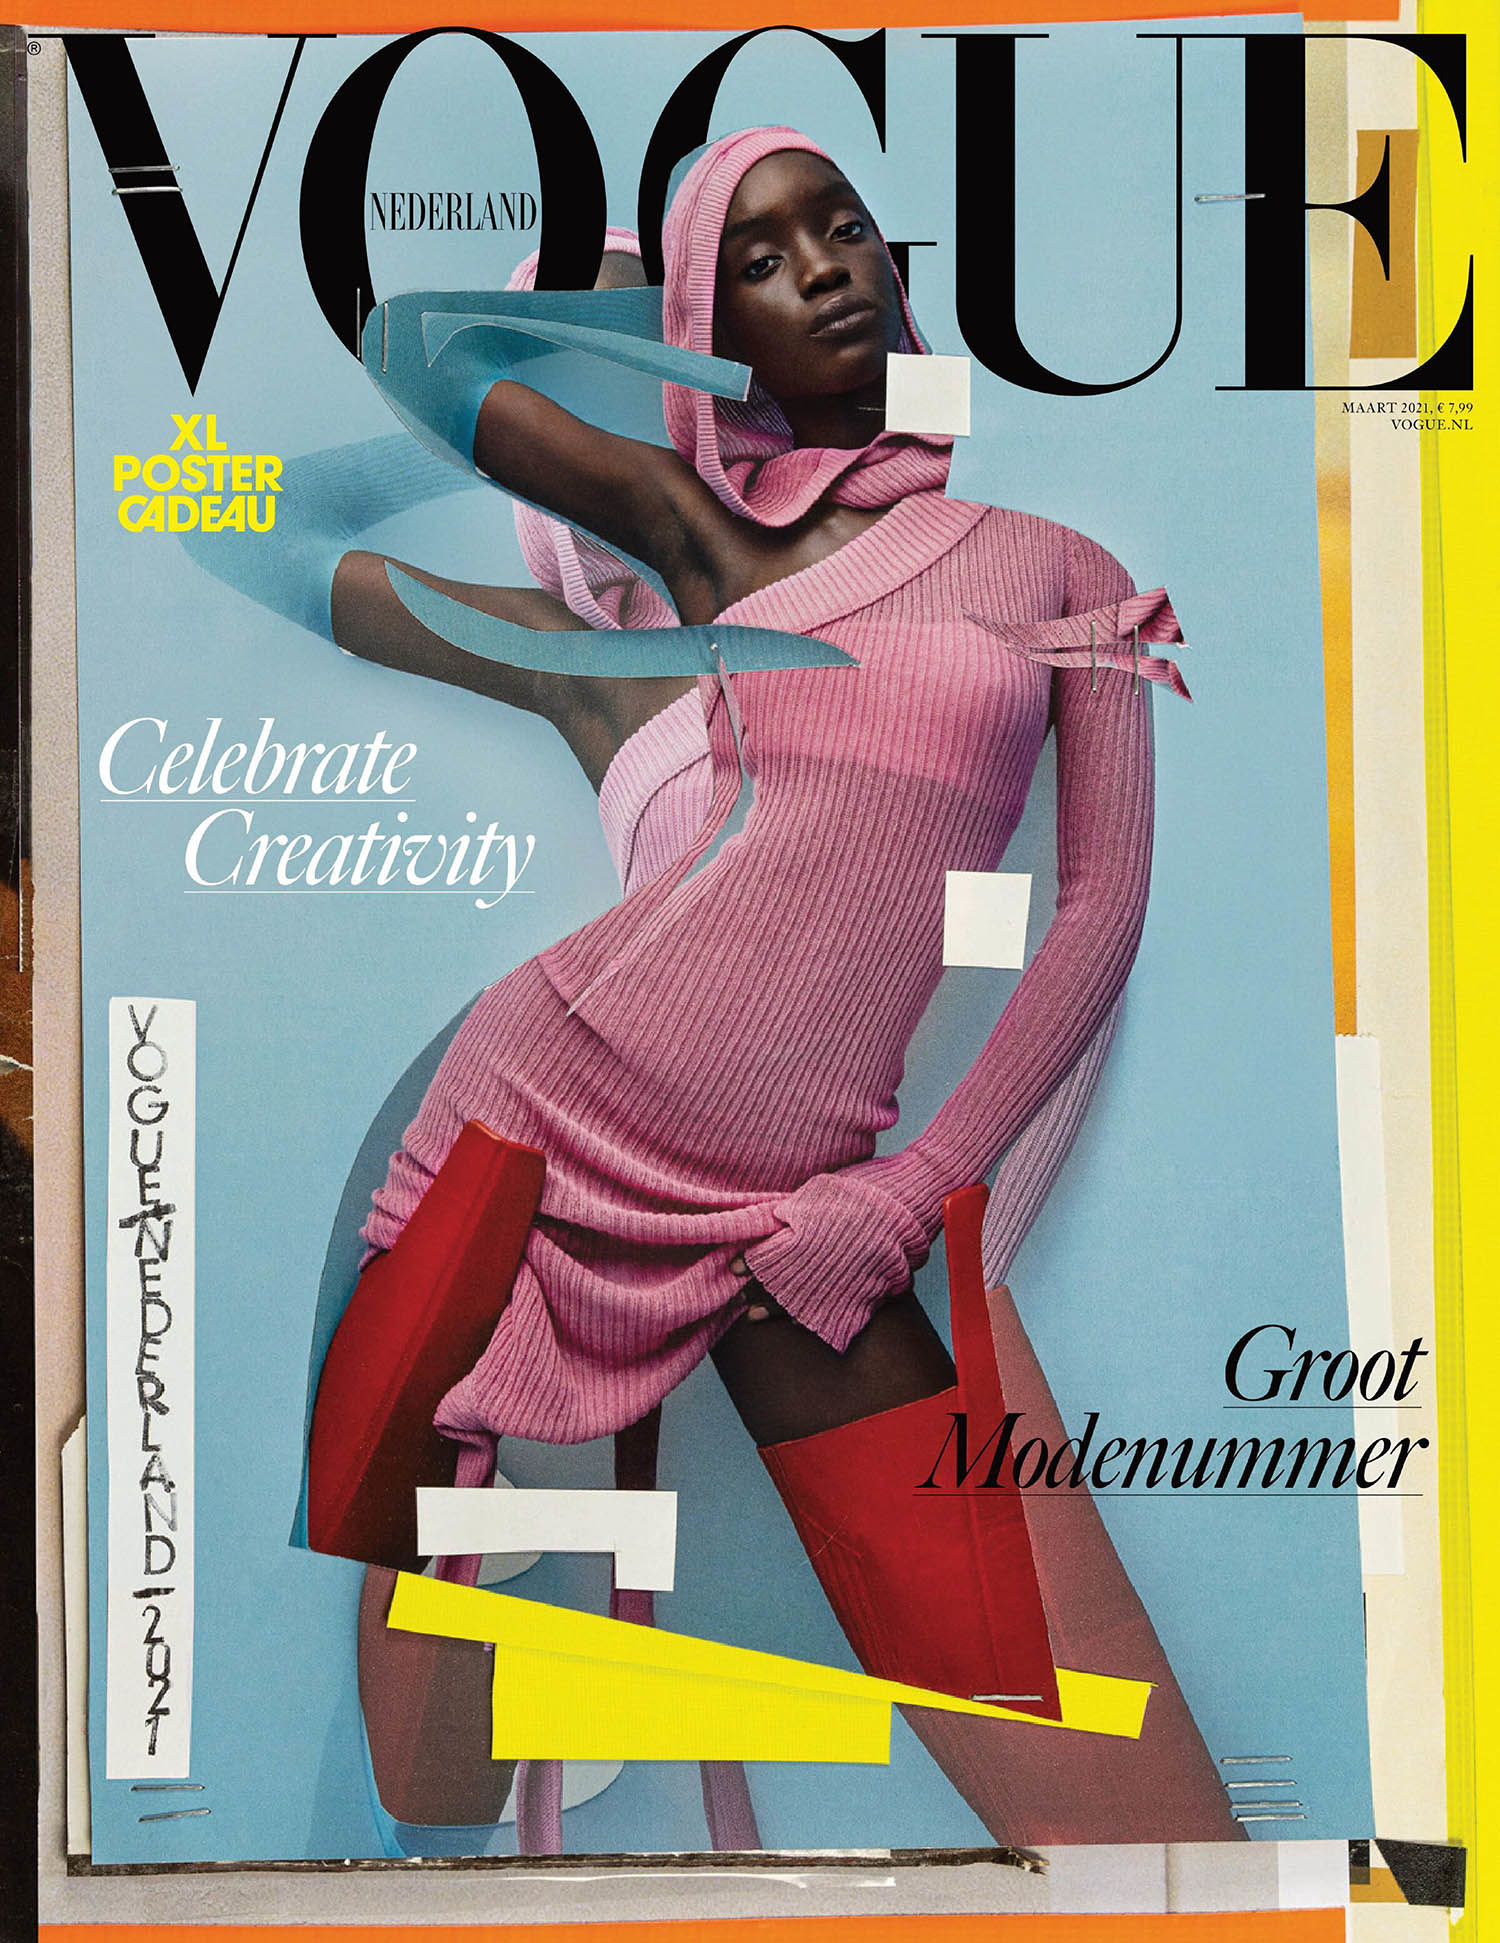 Vogue Netherlands March 2021 Cover Story Editorial